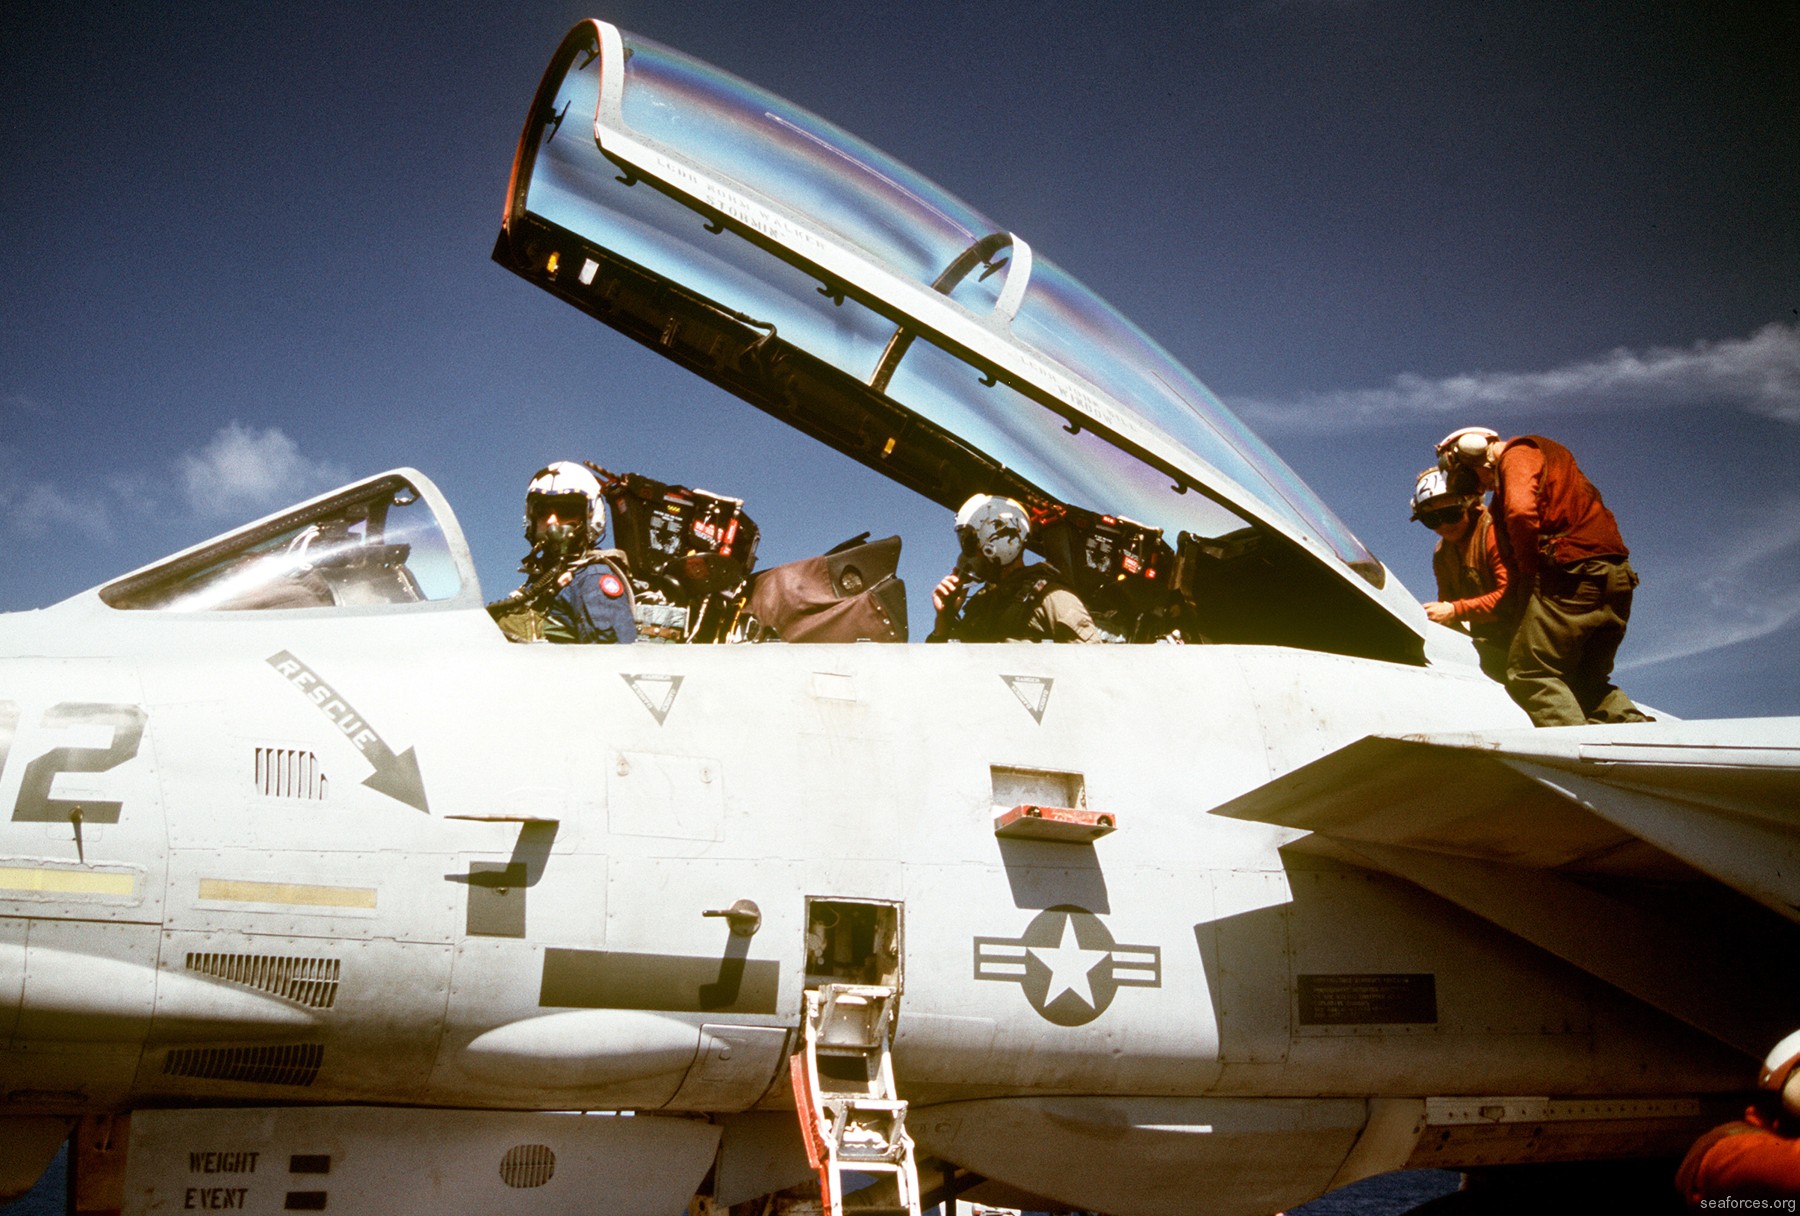 vf-213 black lions fighter squadron us navy f-14a tomcat carrier air wing cvw-11 uss abraham lincoln cvn-72 77